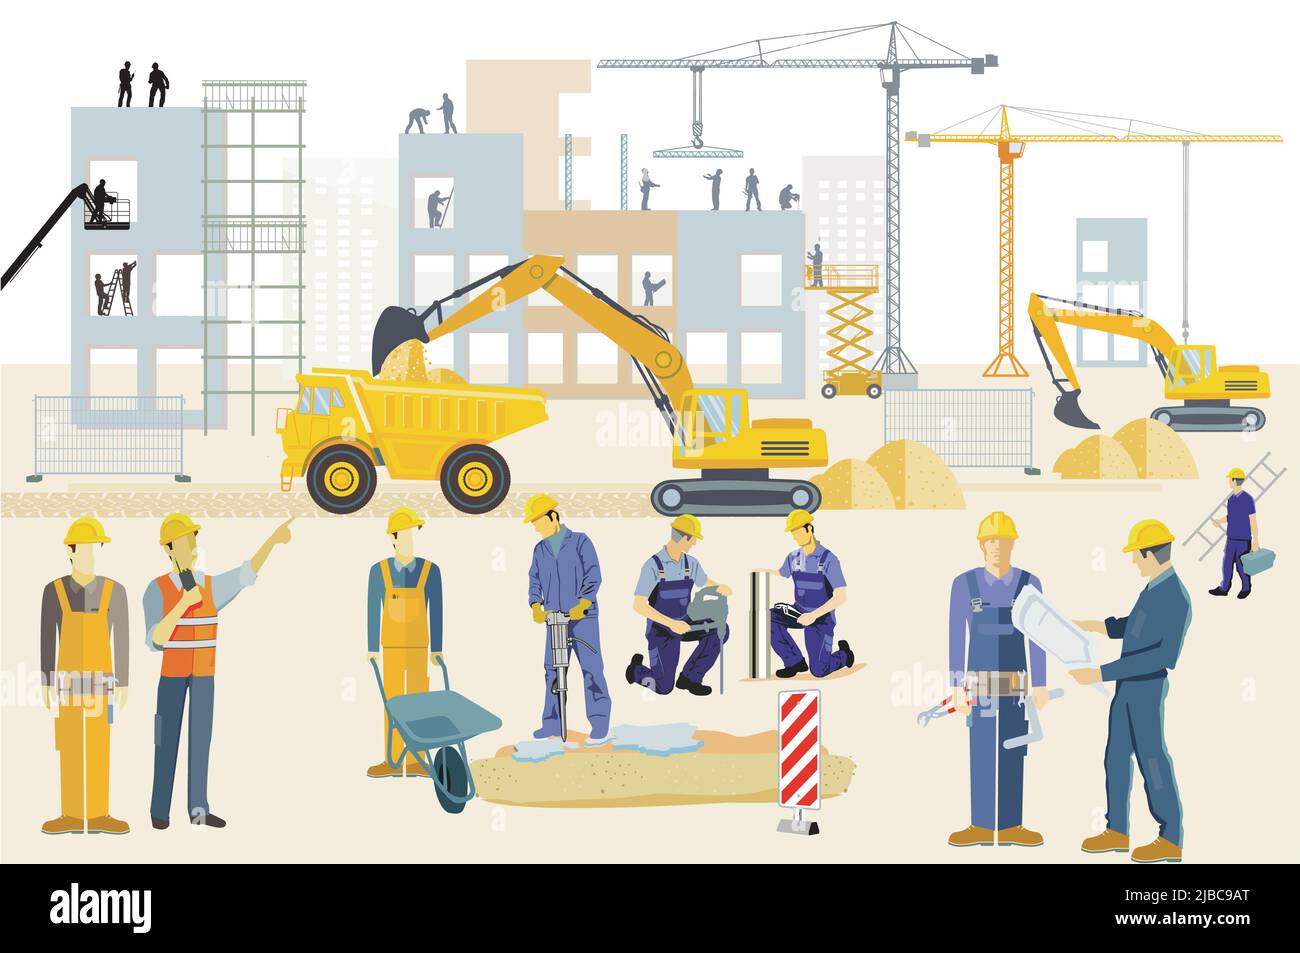 Construction site with excavators, construction machines and heavy trucks, illustration Stock Vector